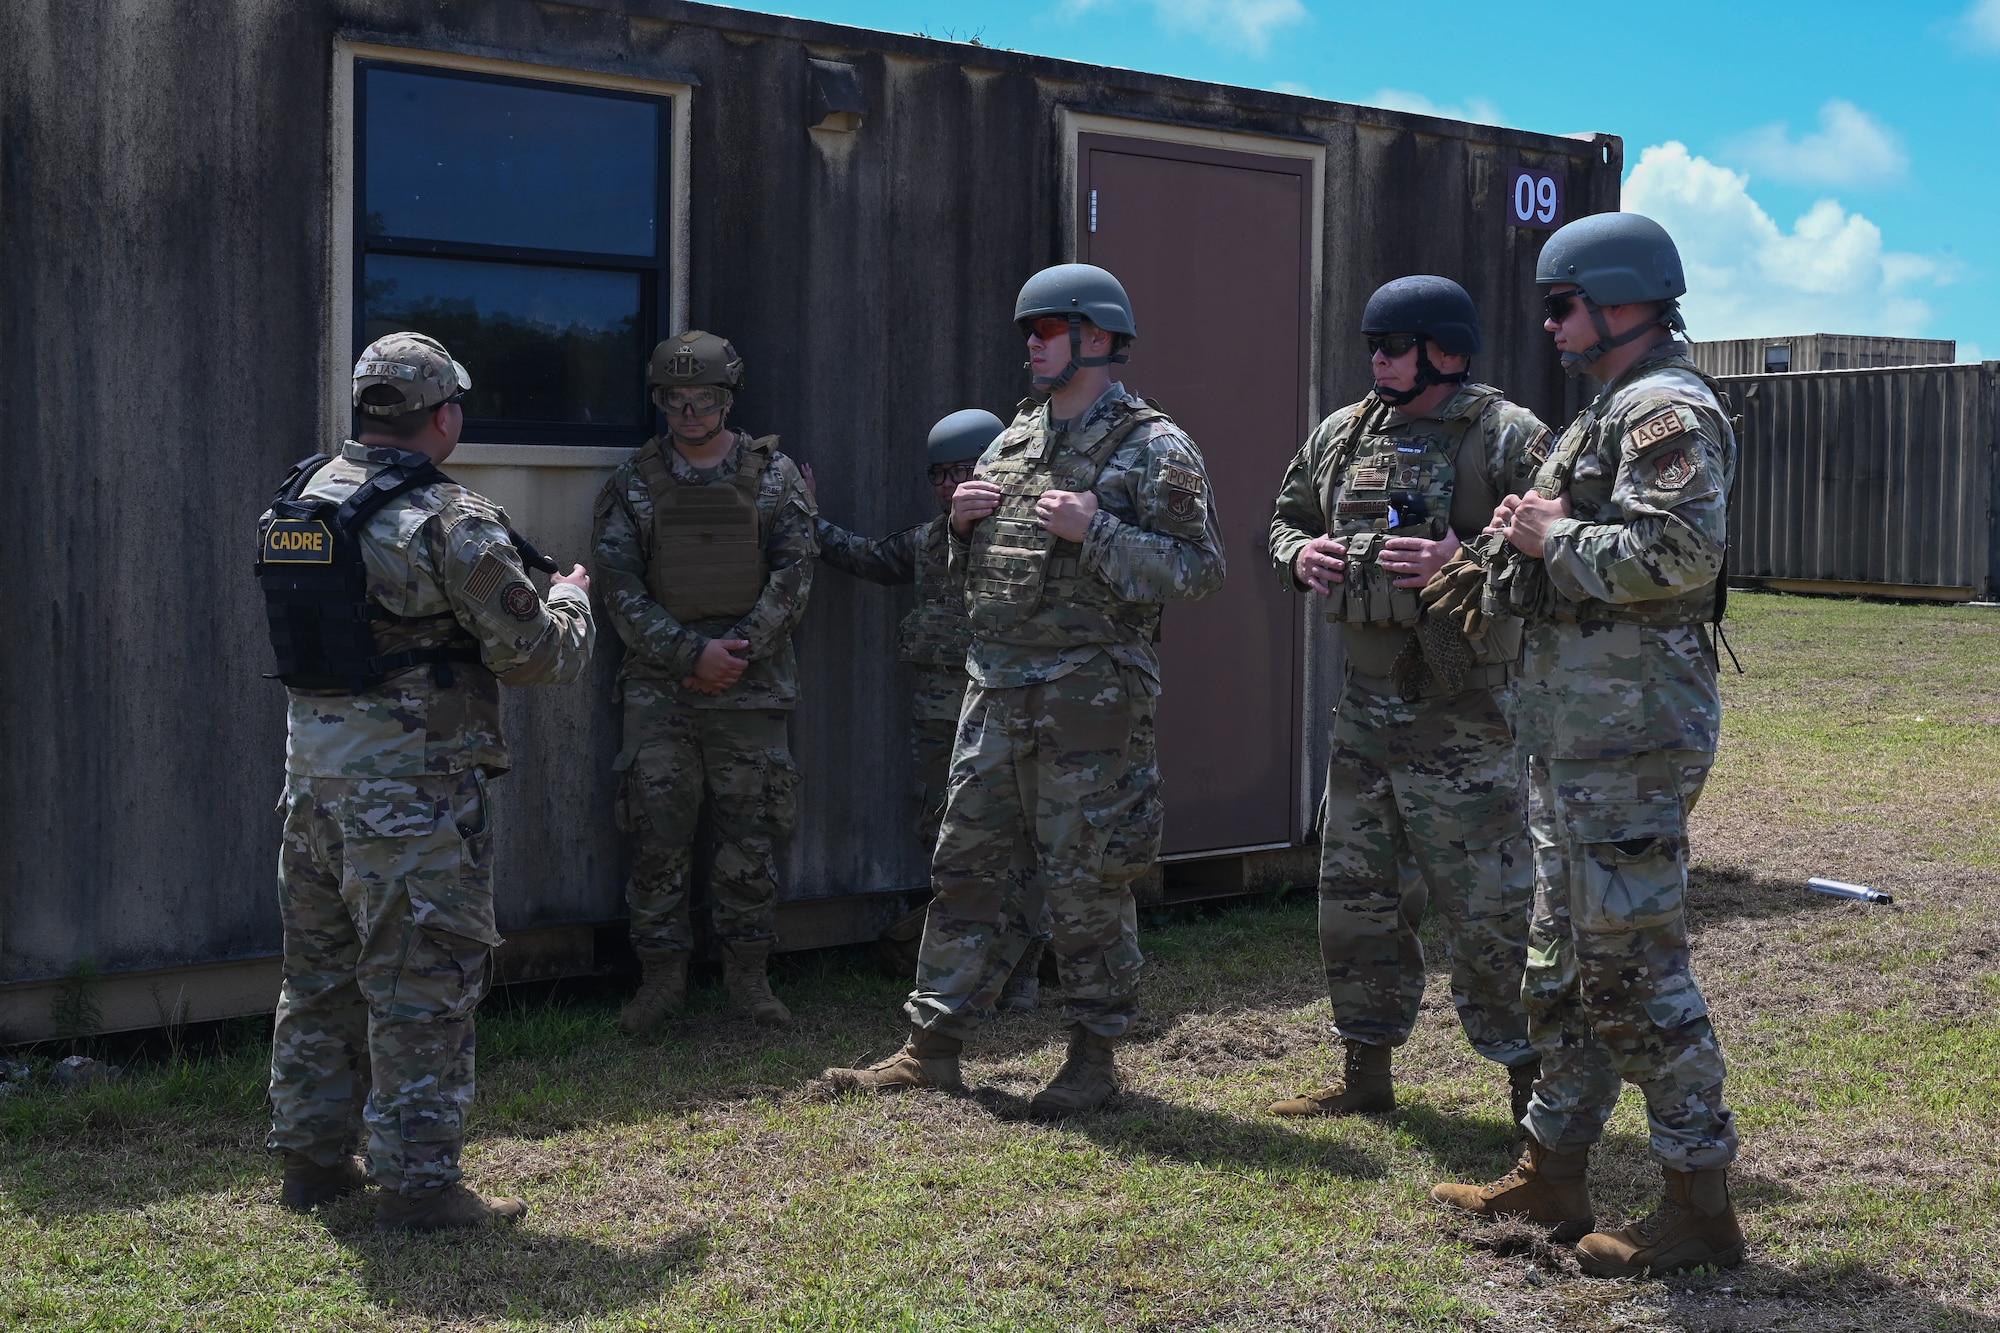 U.S. Air Force members assigned to
Andersen Air Force Base, Guam, receive
a briefing on a scenario
before conducting a training exercise
during the air advisor course at Pacific
Regional Training Center-Andersen,
Guam, March 31, 2023.